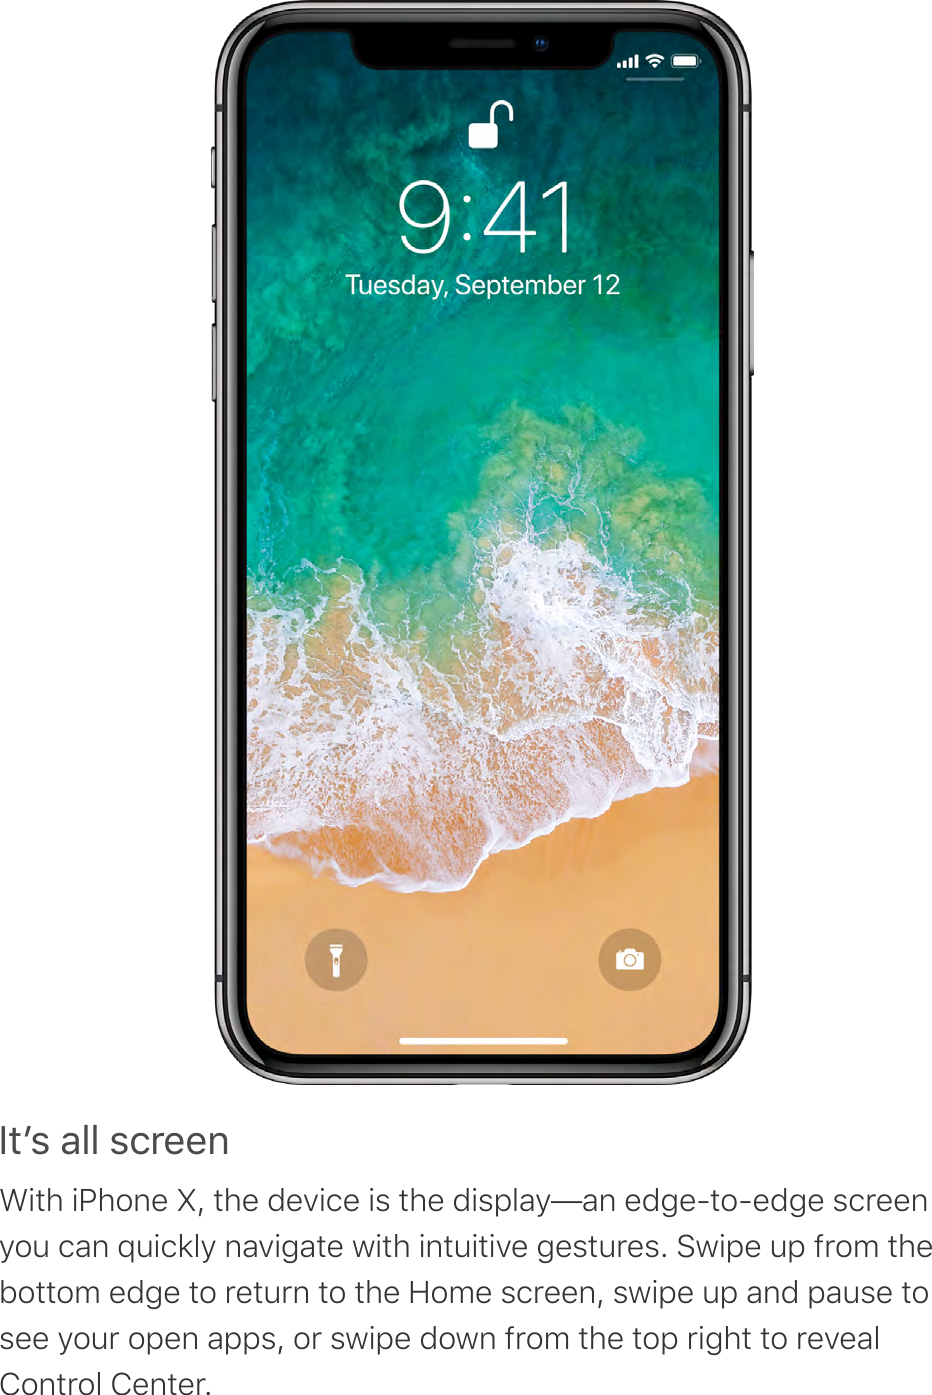 )*+,&apos;-..&apos;,/0&amp;&amp;%With iPhone X, the device is the display—an edge-to-edge screenyou can quickly navigate with intuitive gestures. Swipe up from thebottom edge to return to the Home screen, swipe up and pause tosee your open apps, or swipe down from the top right to revealControl Center.